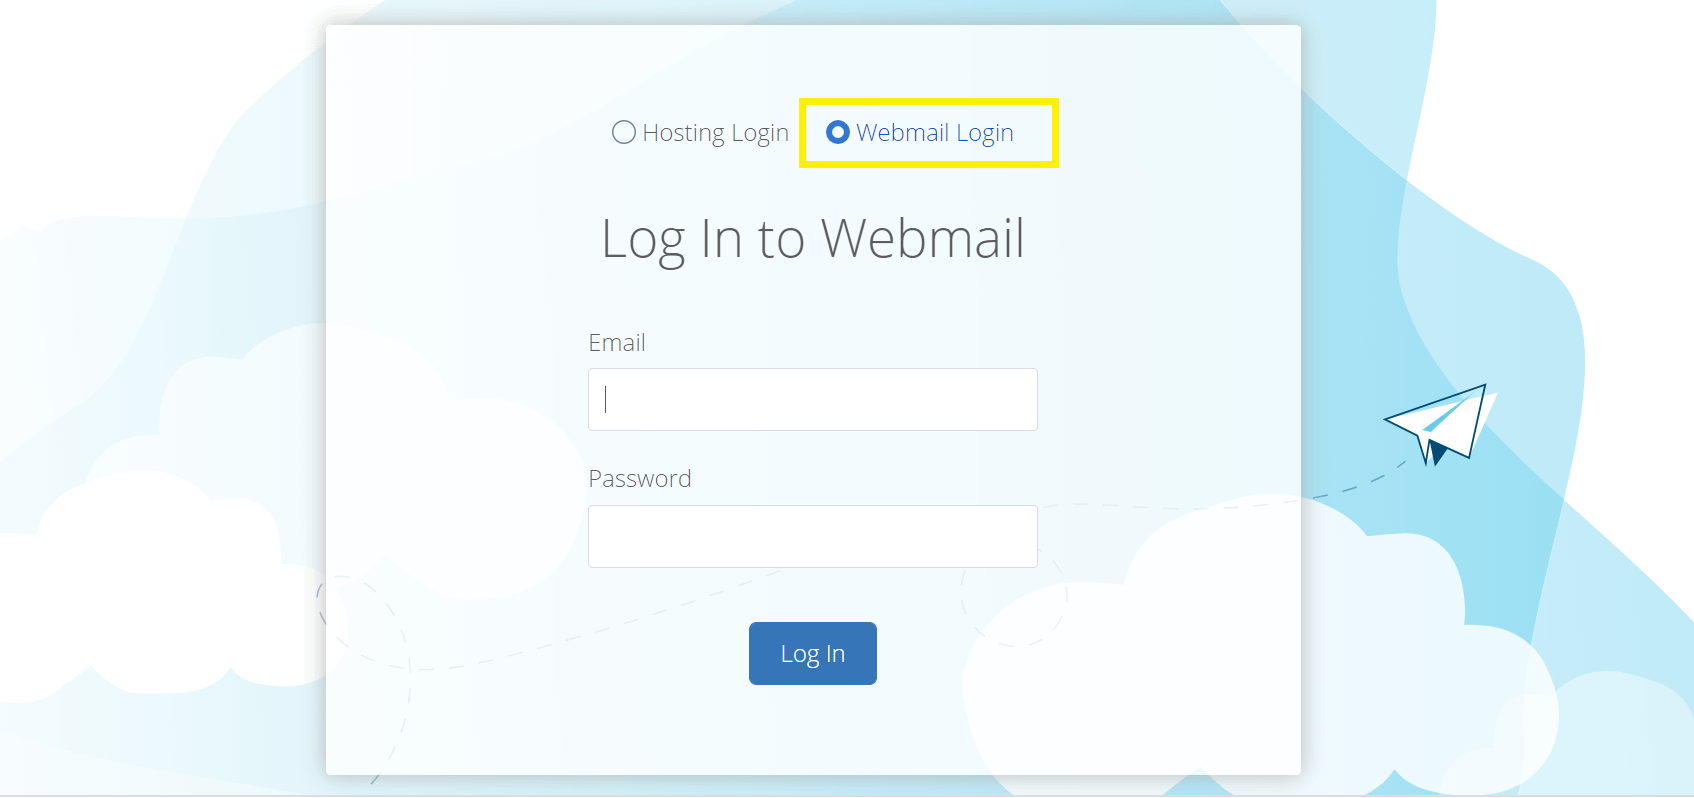 Bluehost's Webmail Login page to access your email with personalized domain